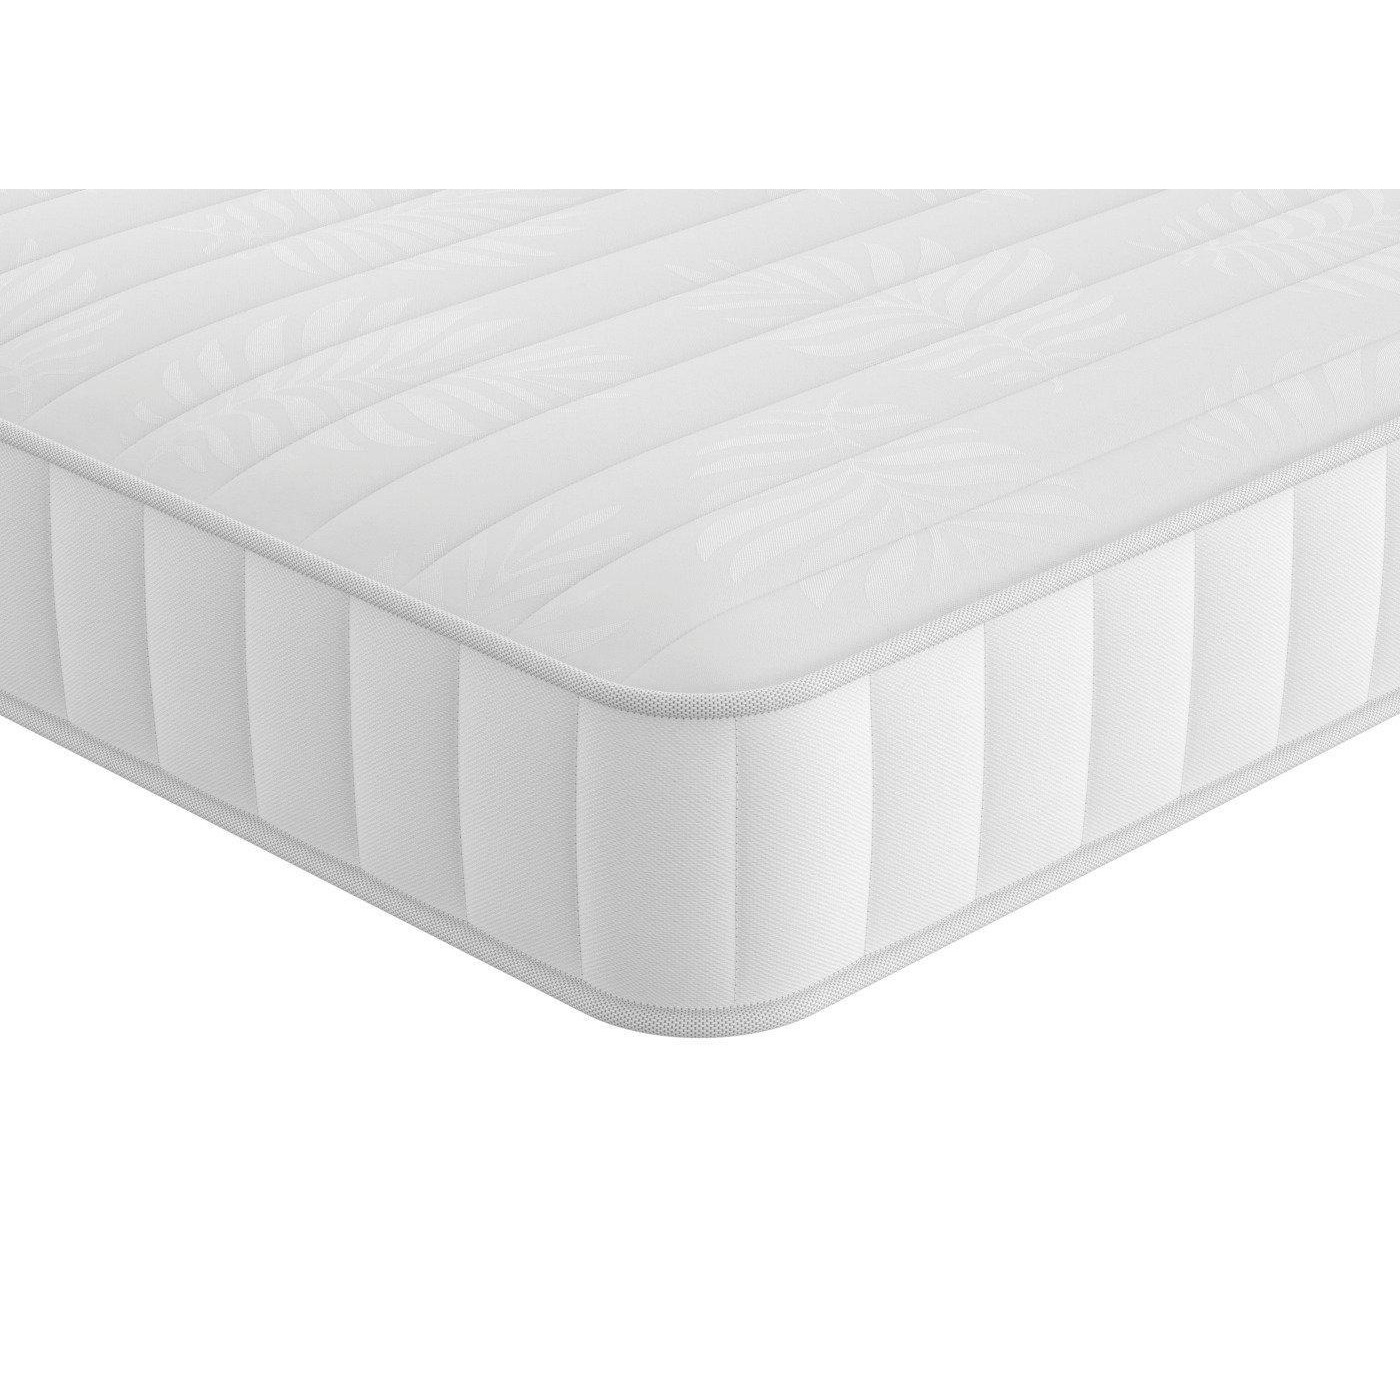 Dreams Workshop Simmonds Traditional Spring Mattress - 5'0 King